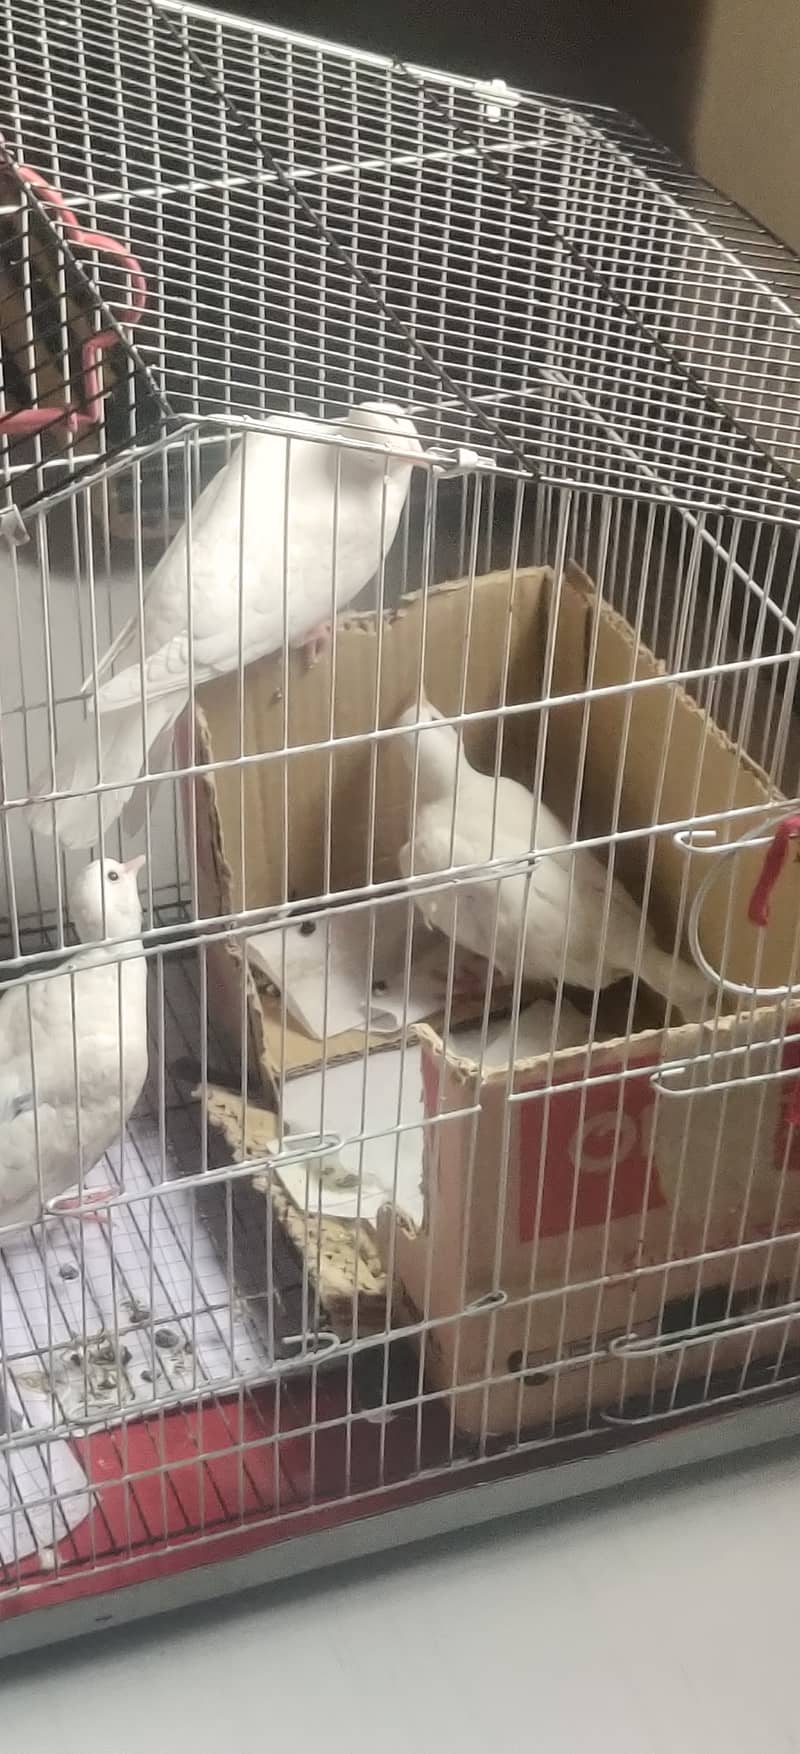 BARABARI DOVES FOR SALE ONE PAIR and one female 1